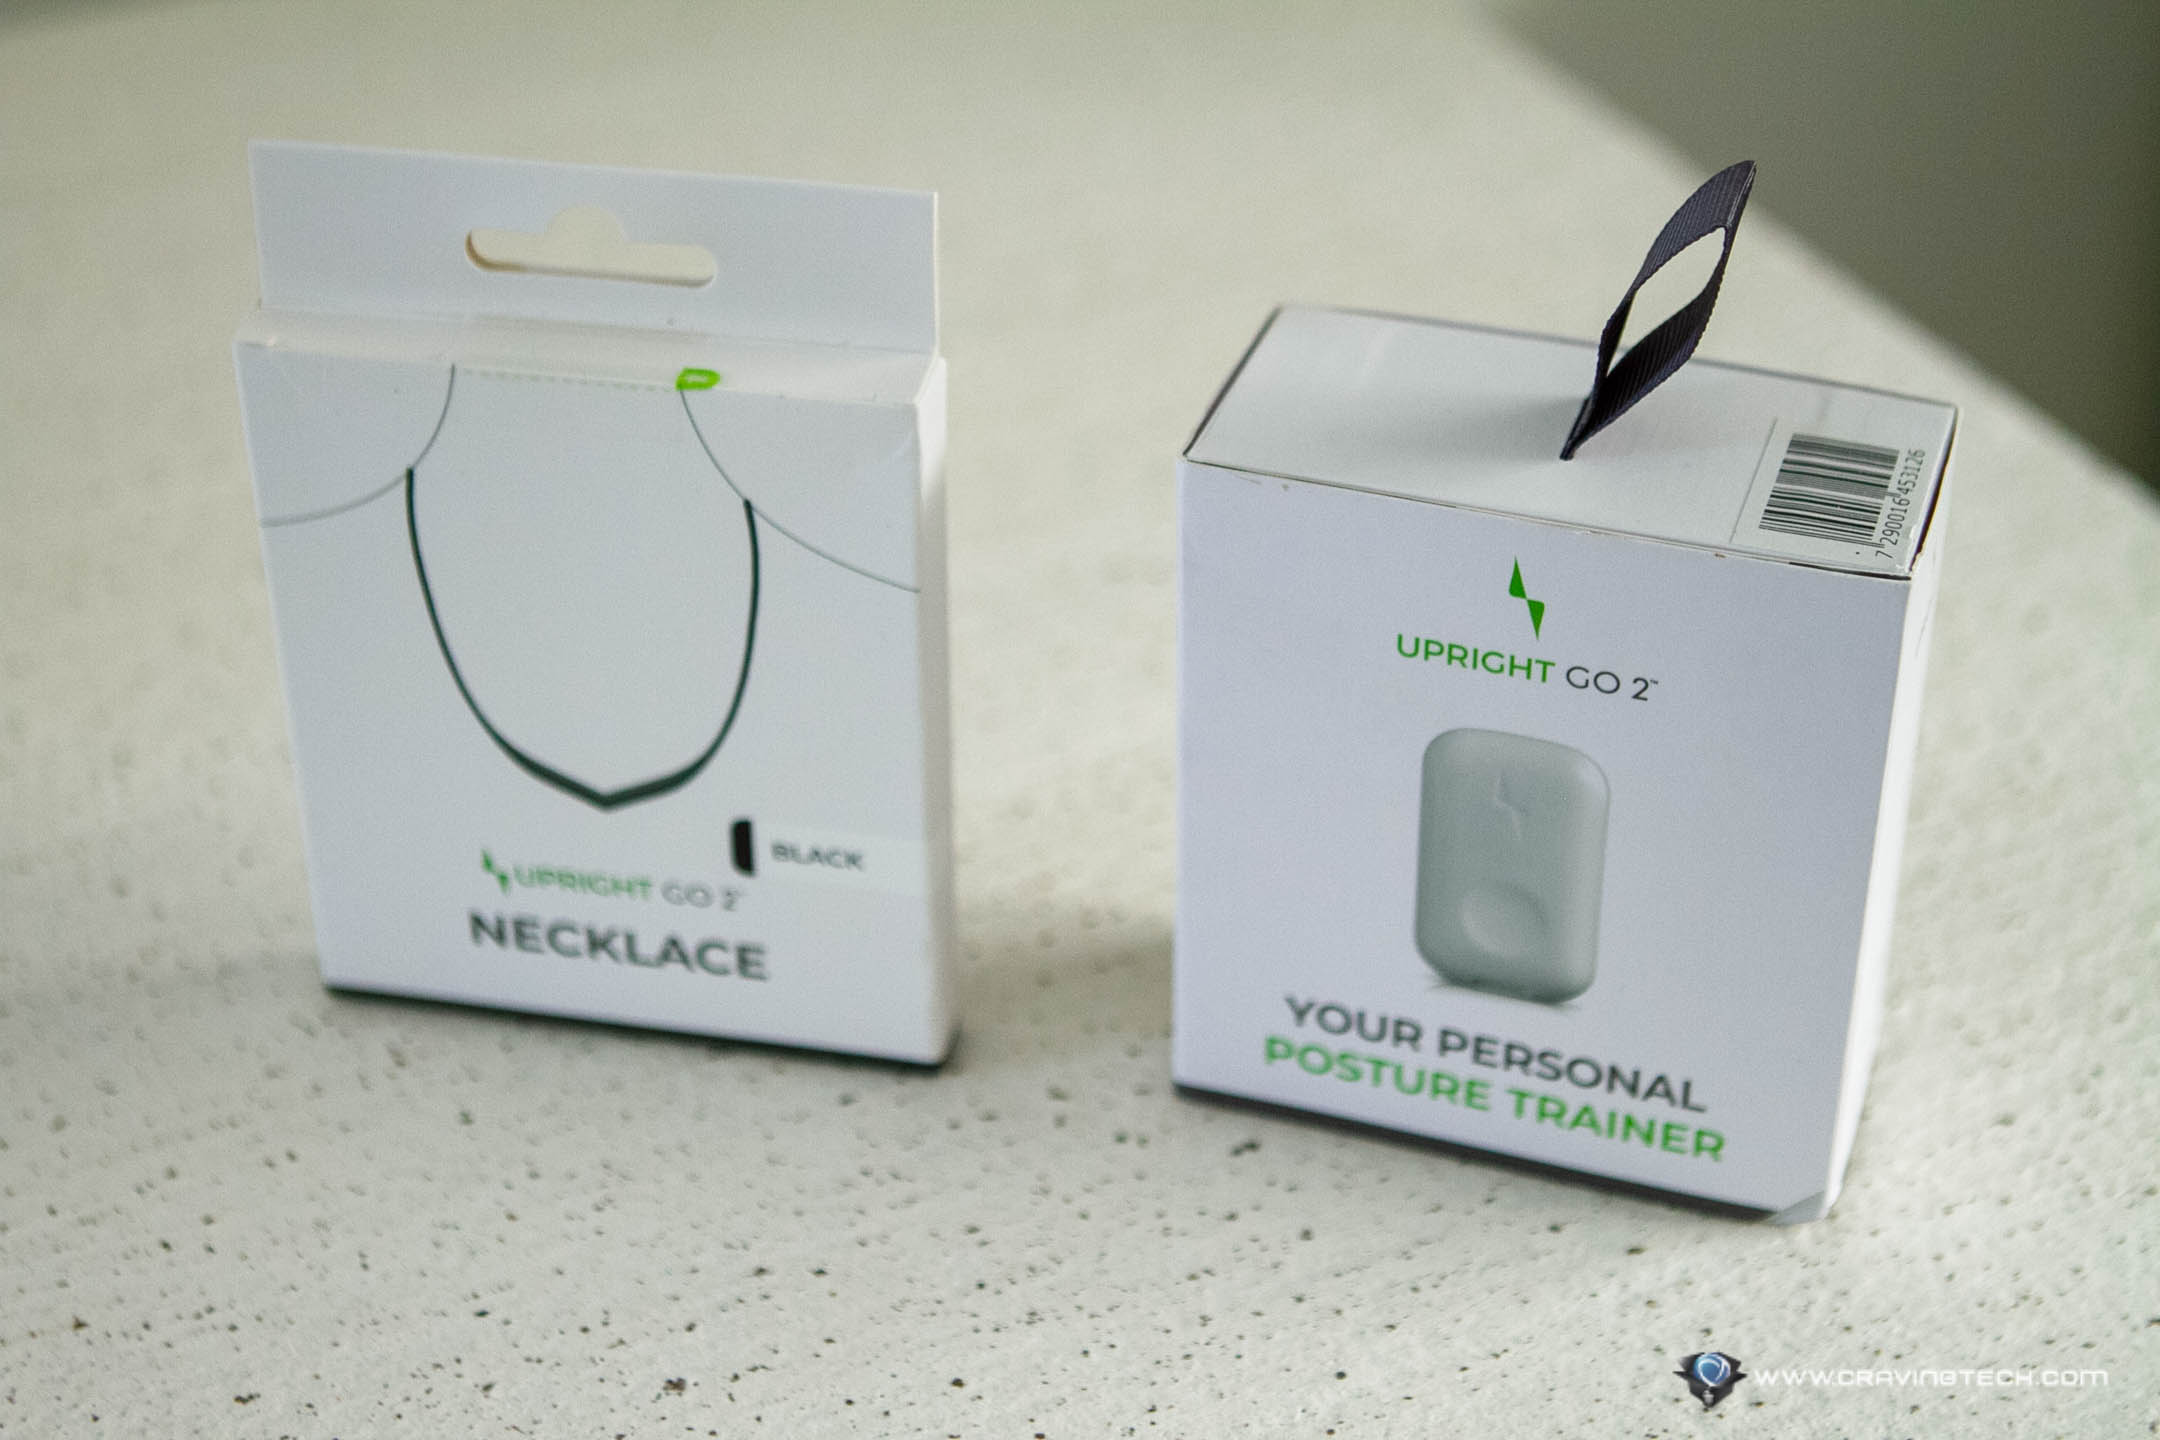 UPRIGHT GO 2 with Necklace accessory Review